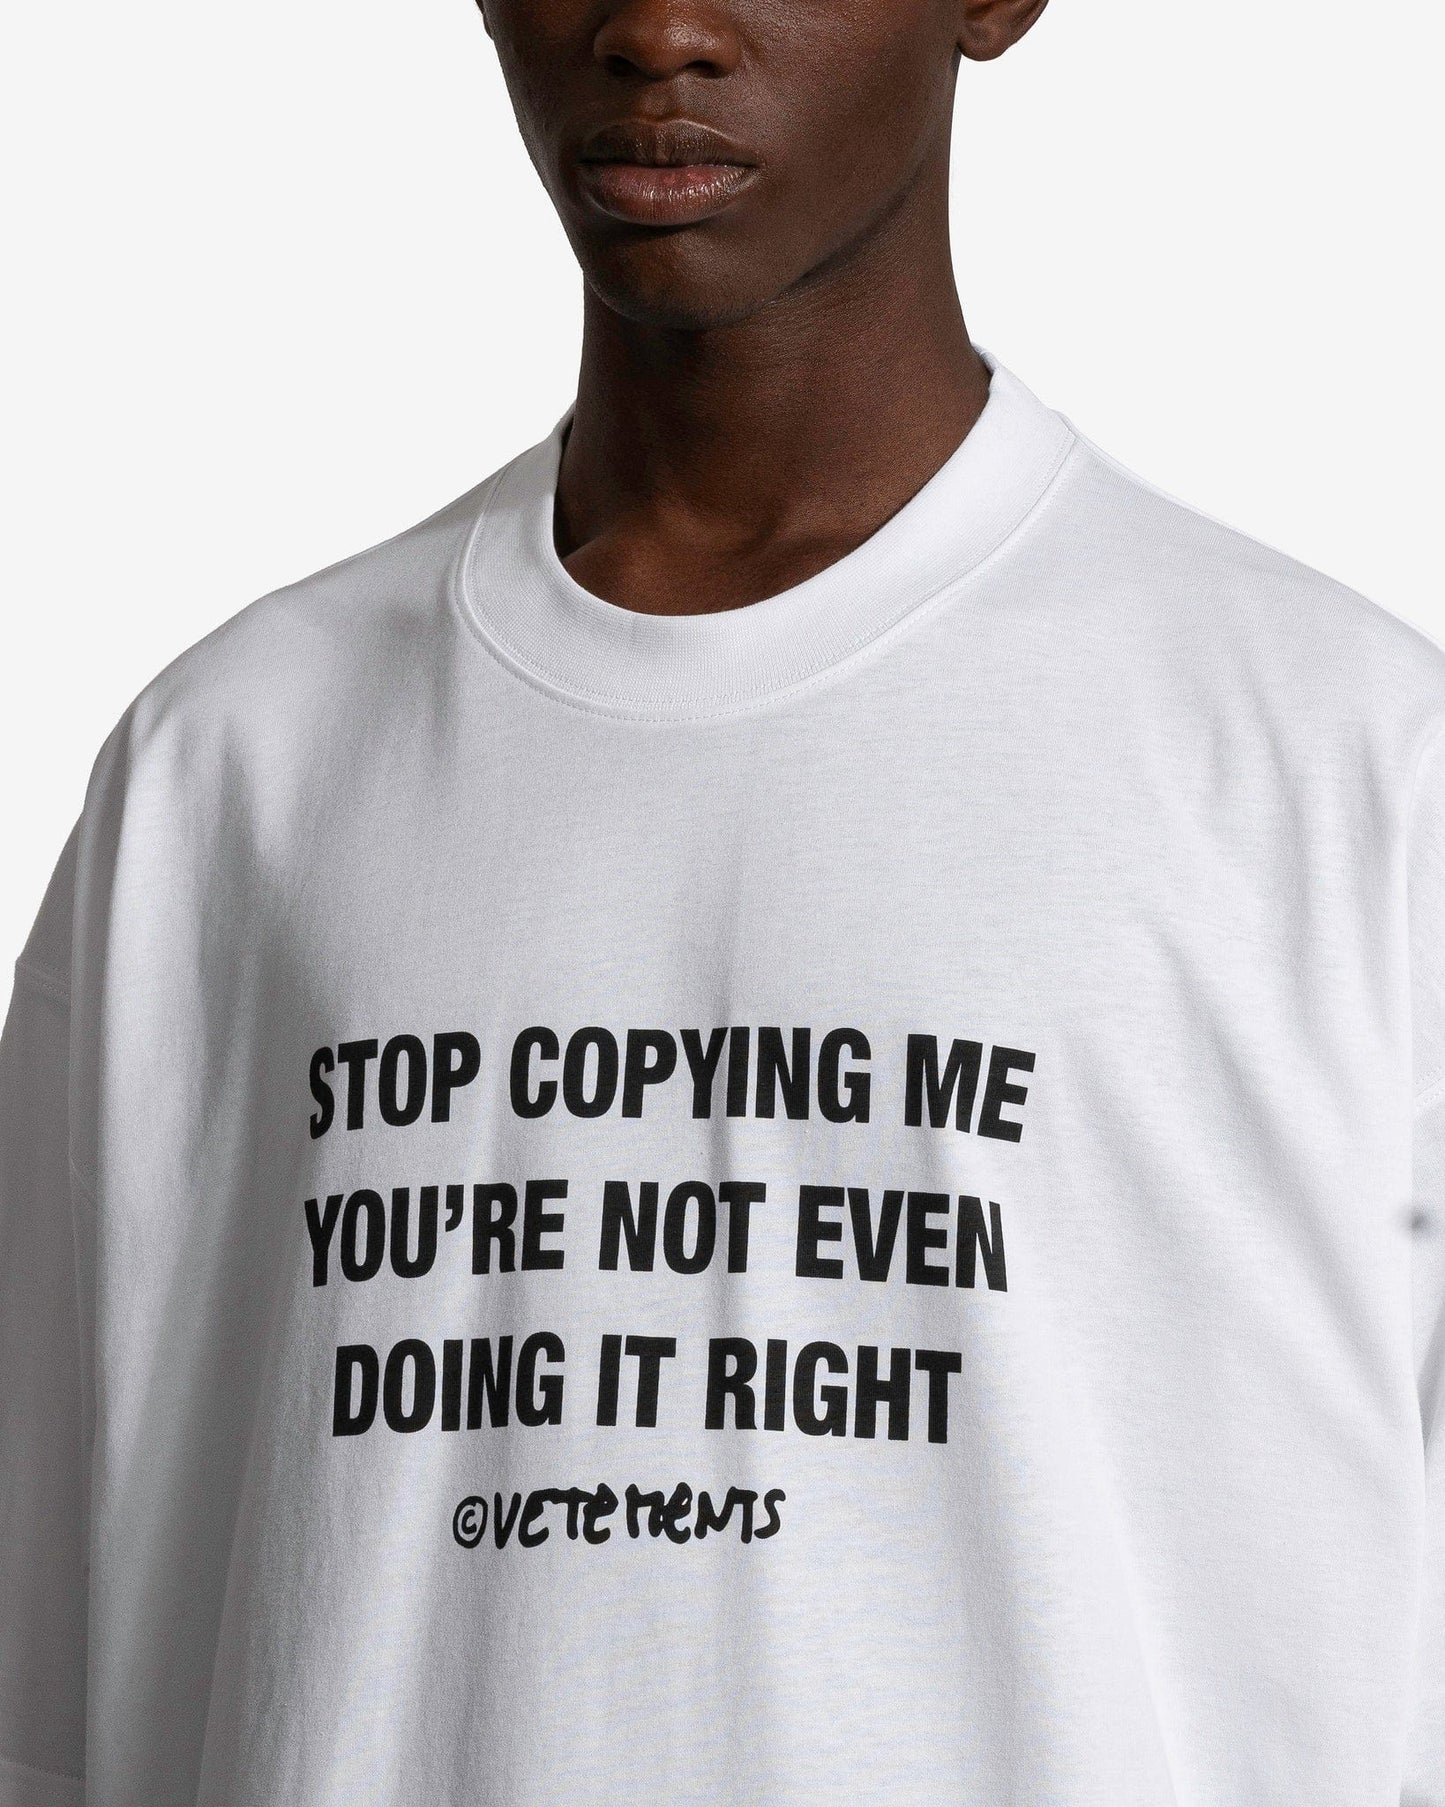 Stop Copying Me Fitted T-Shirt